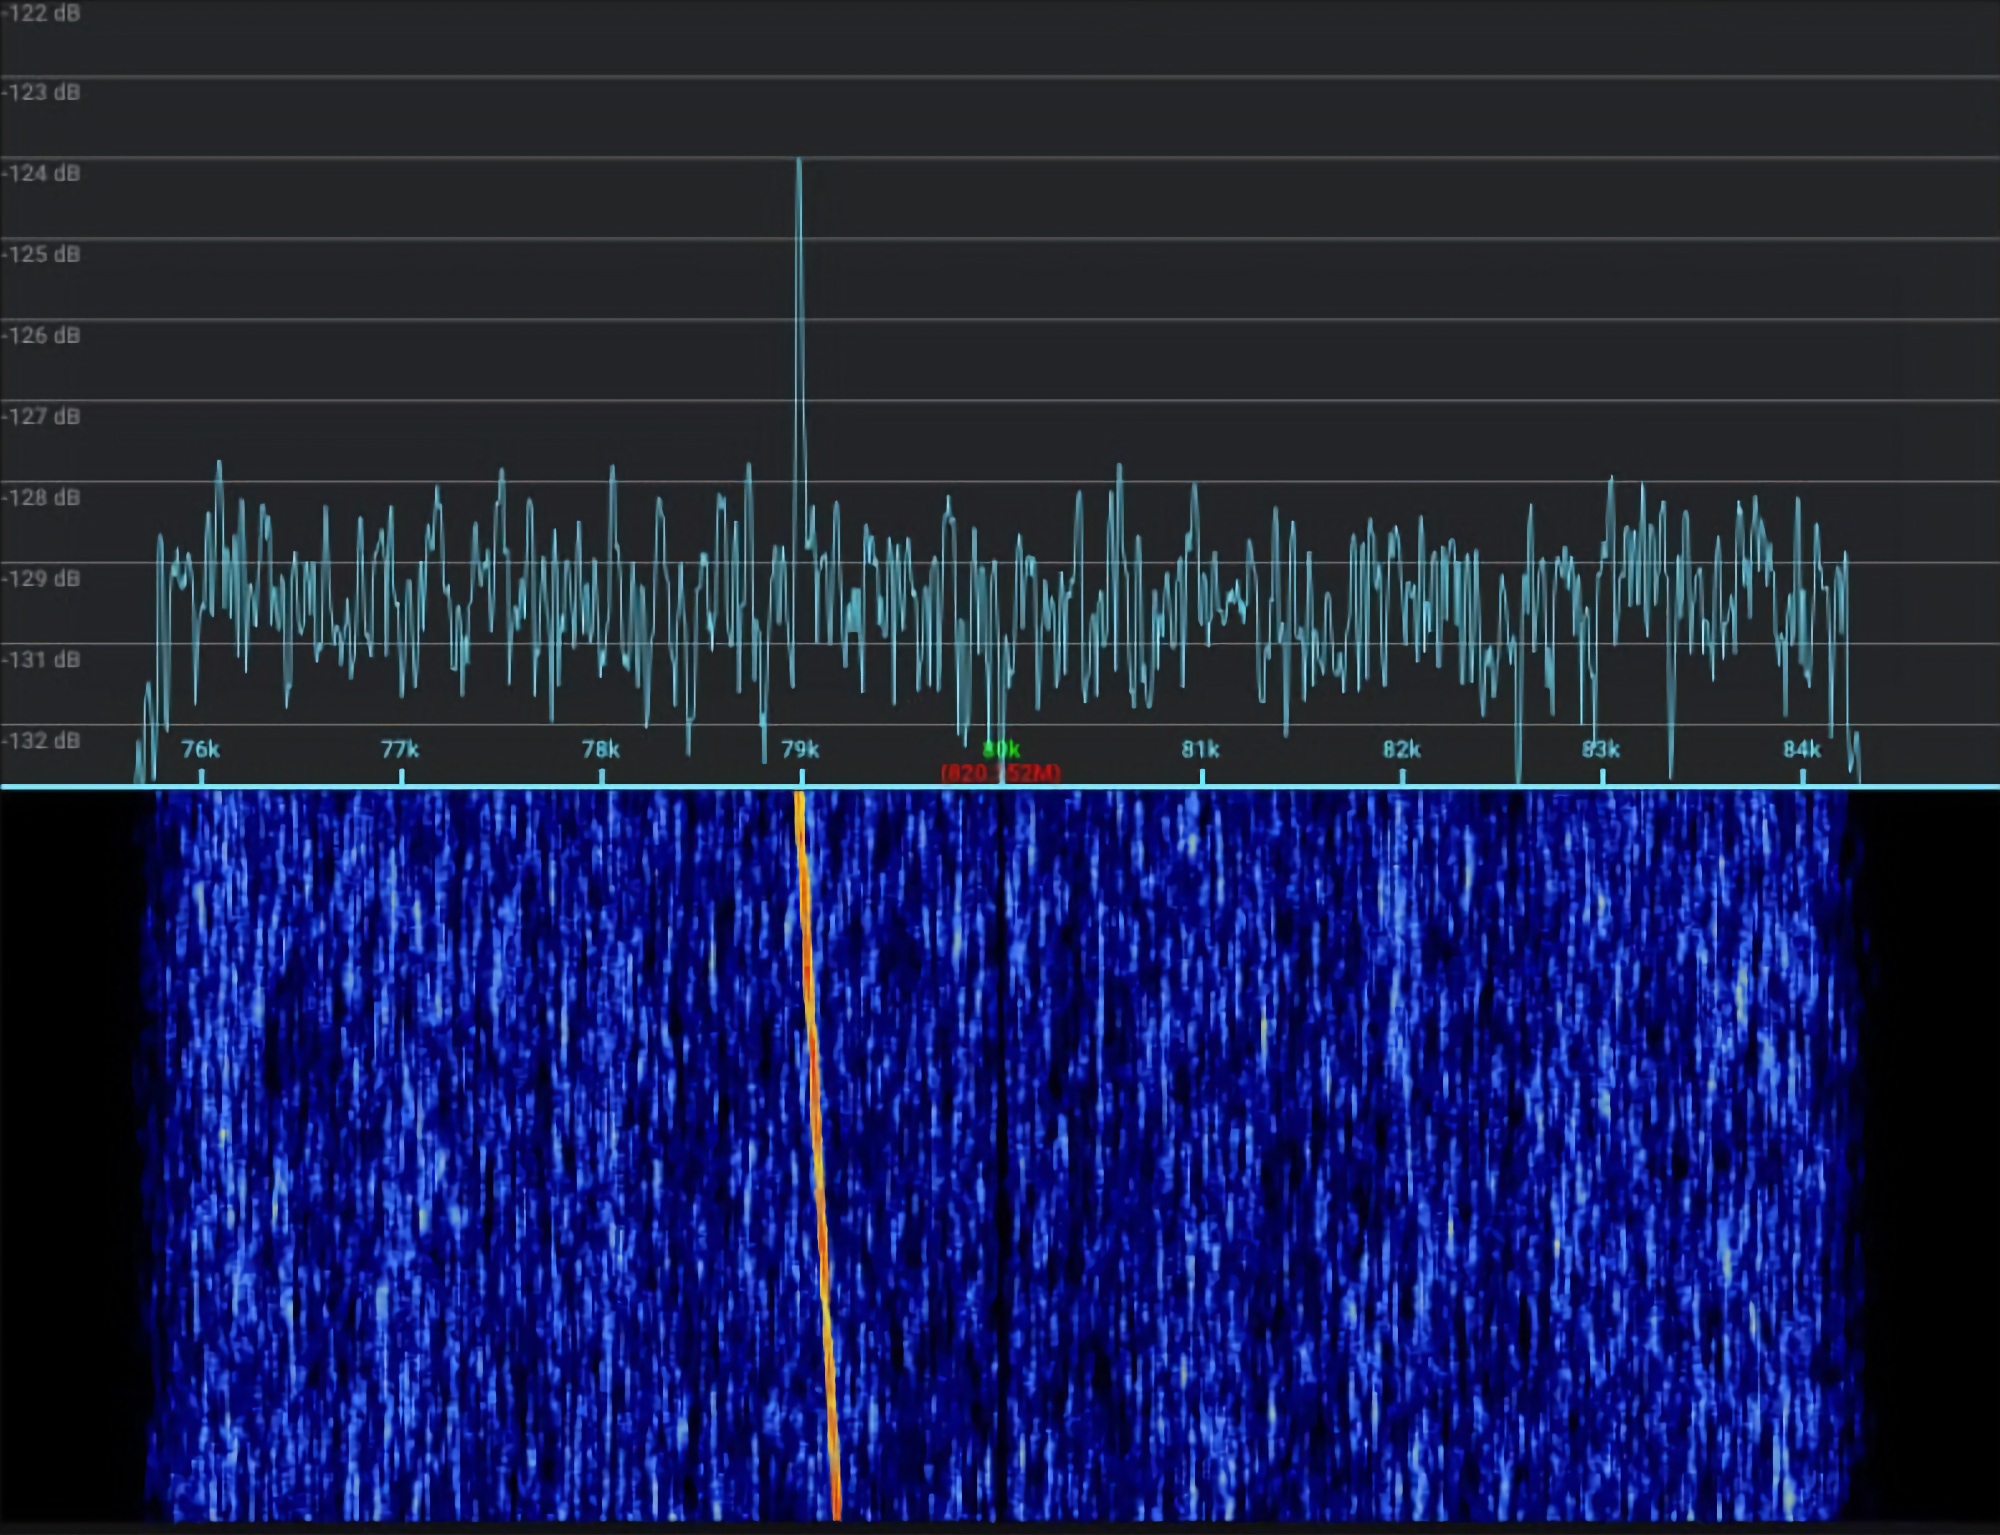 What radio frequencies are used for space communication? Radio signal from Mars Express in X band (8420.4 MHz), acquired with INTREPID 500-12 ground station.